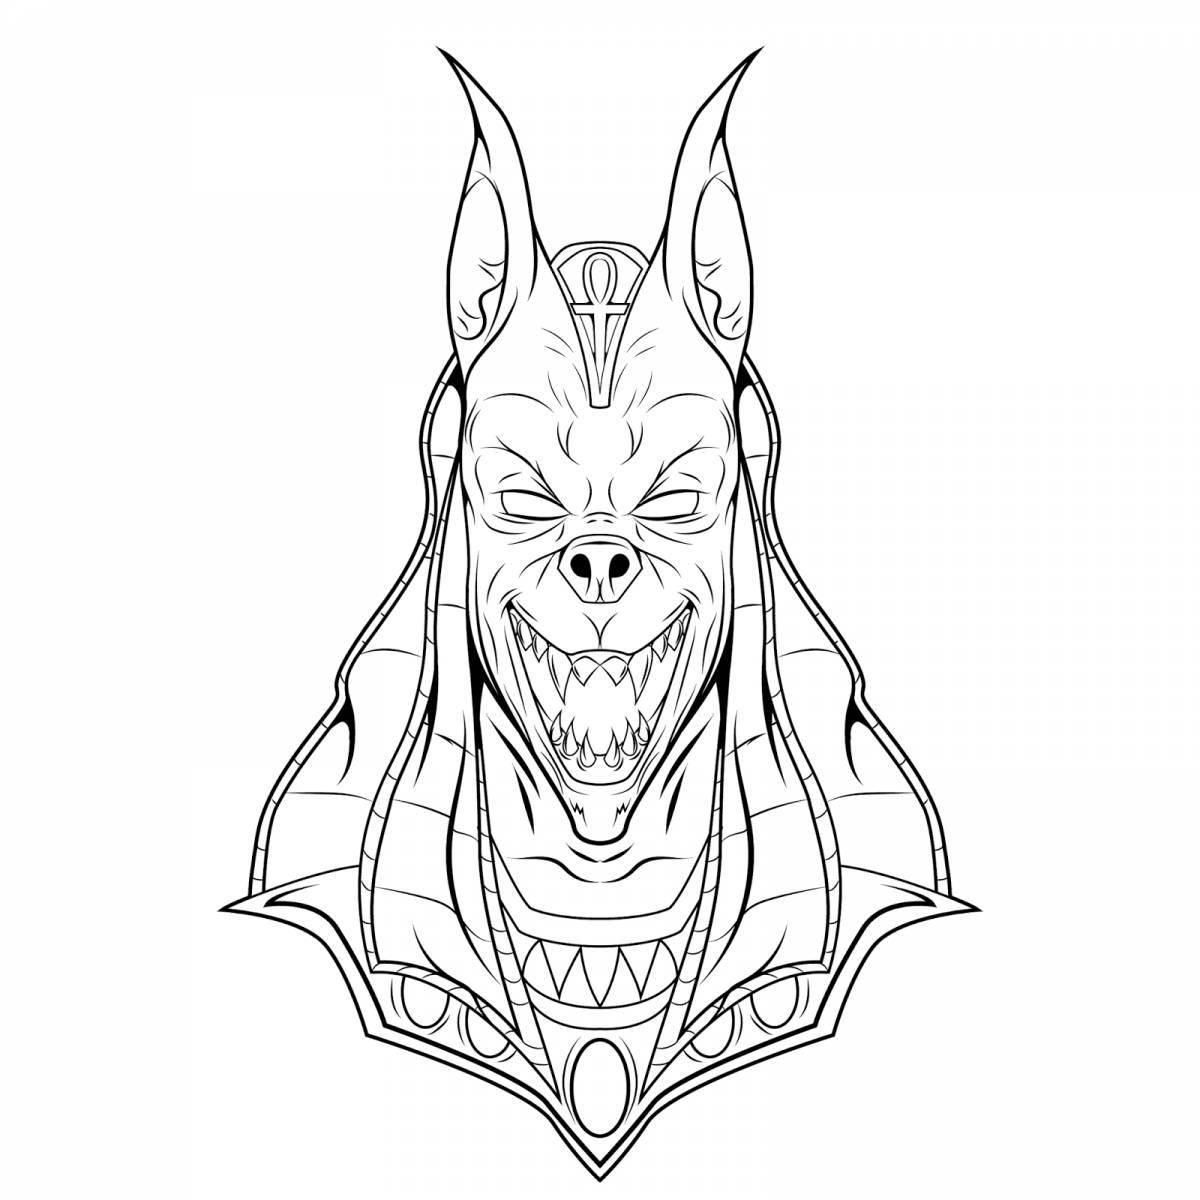 Anubis awesome coloring book